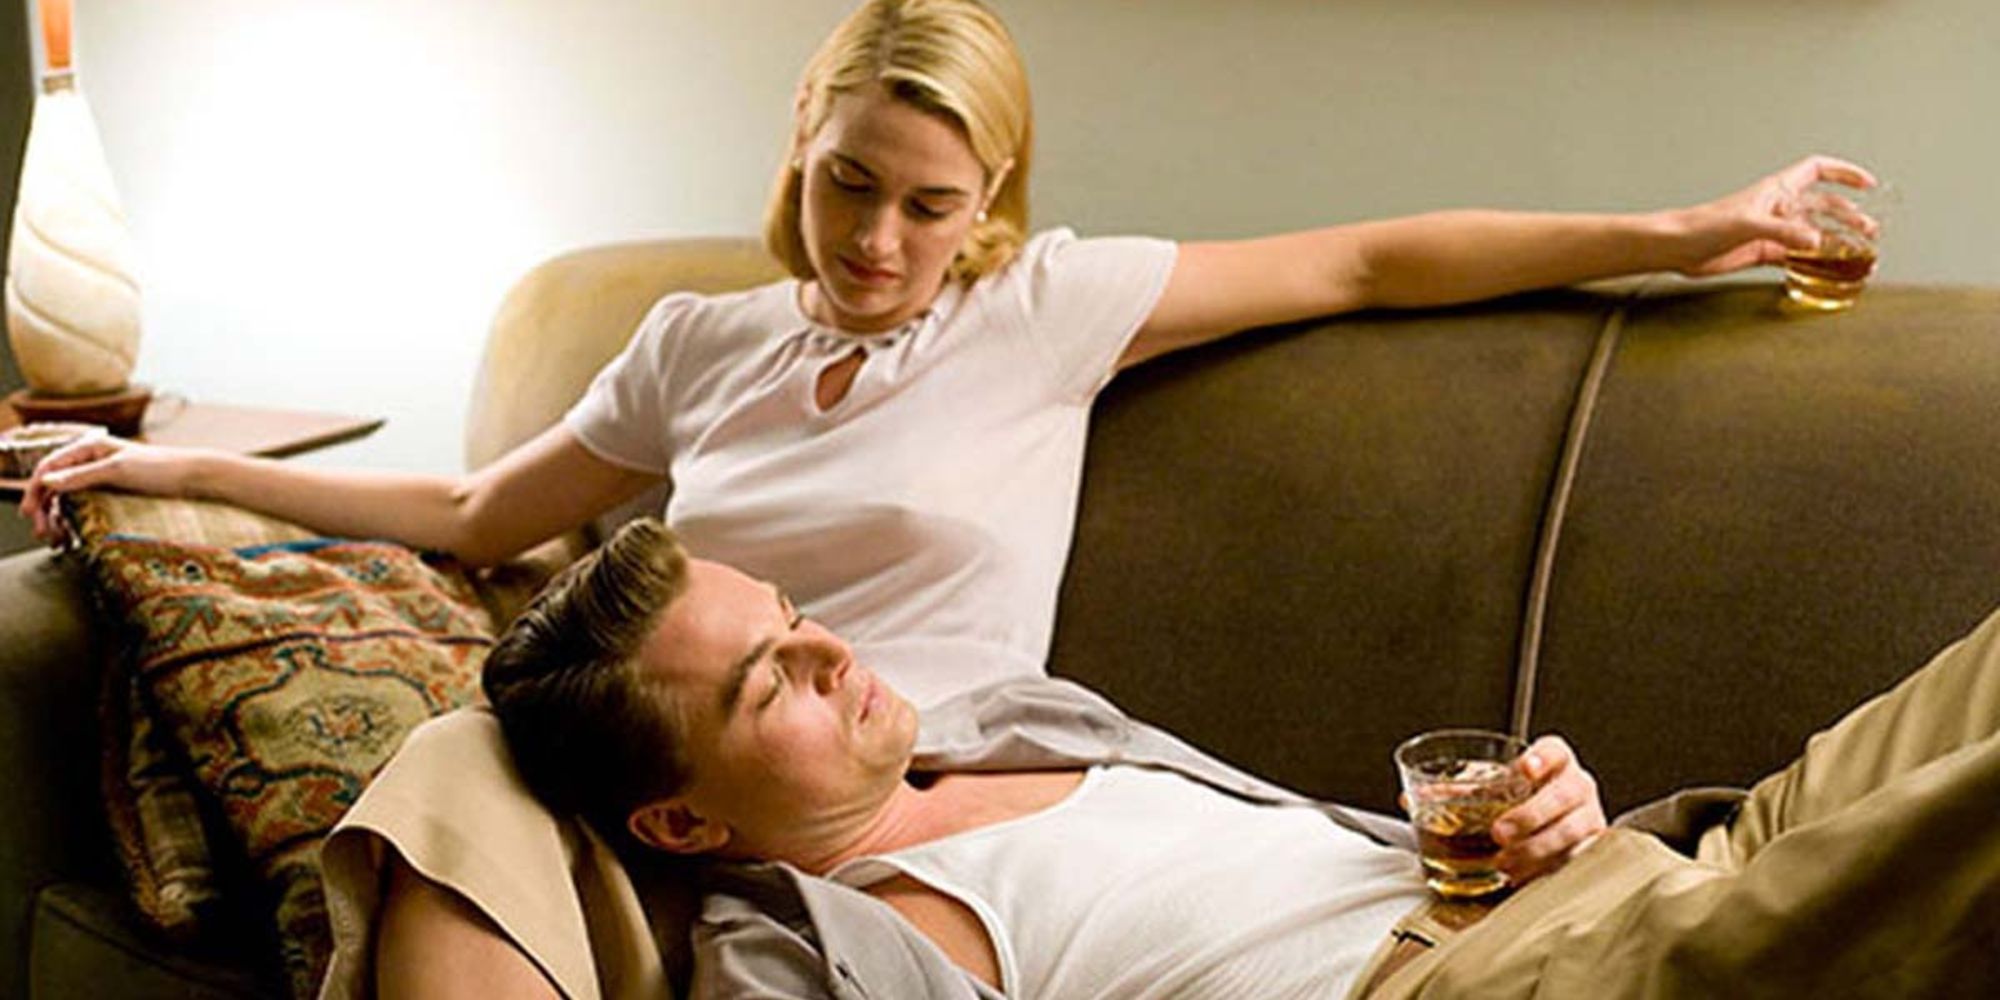 Kate Winslet & Leonardo DiCaprio 5 Ways Their Onscreen Love Is Stronger On Revolutionary Road (5 Ways Its On Titanic)